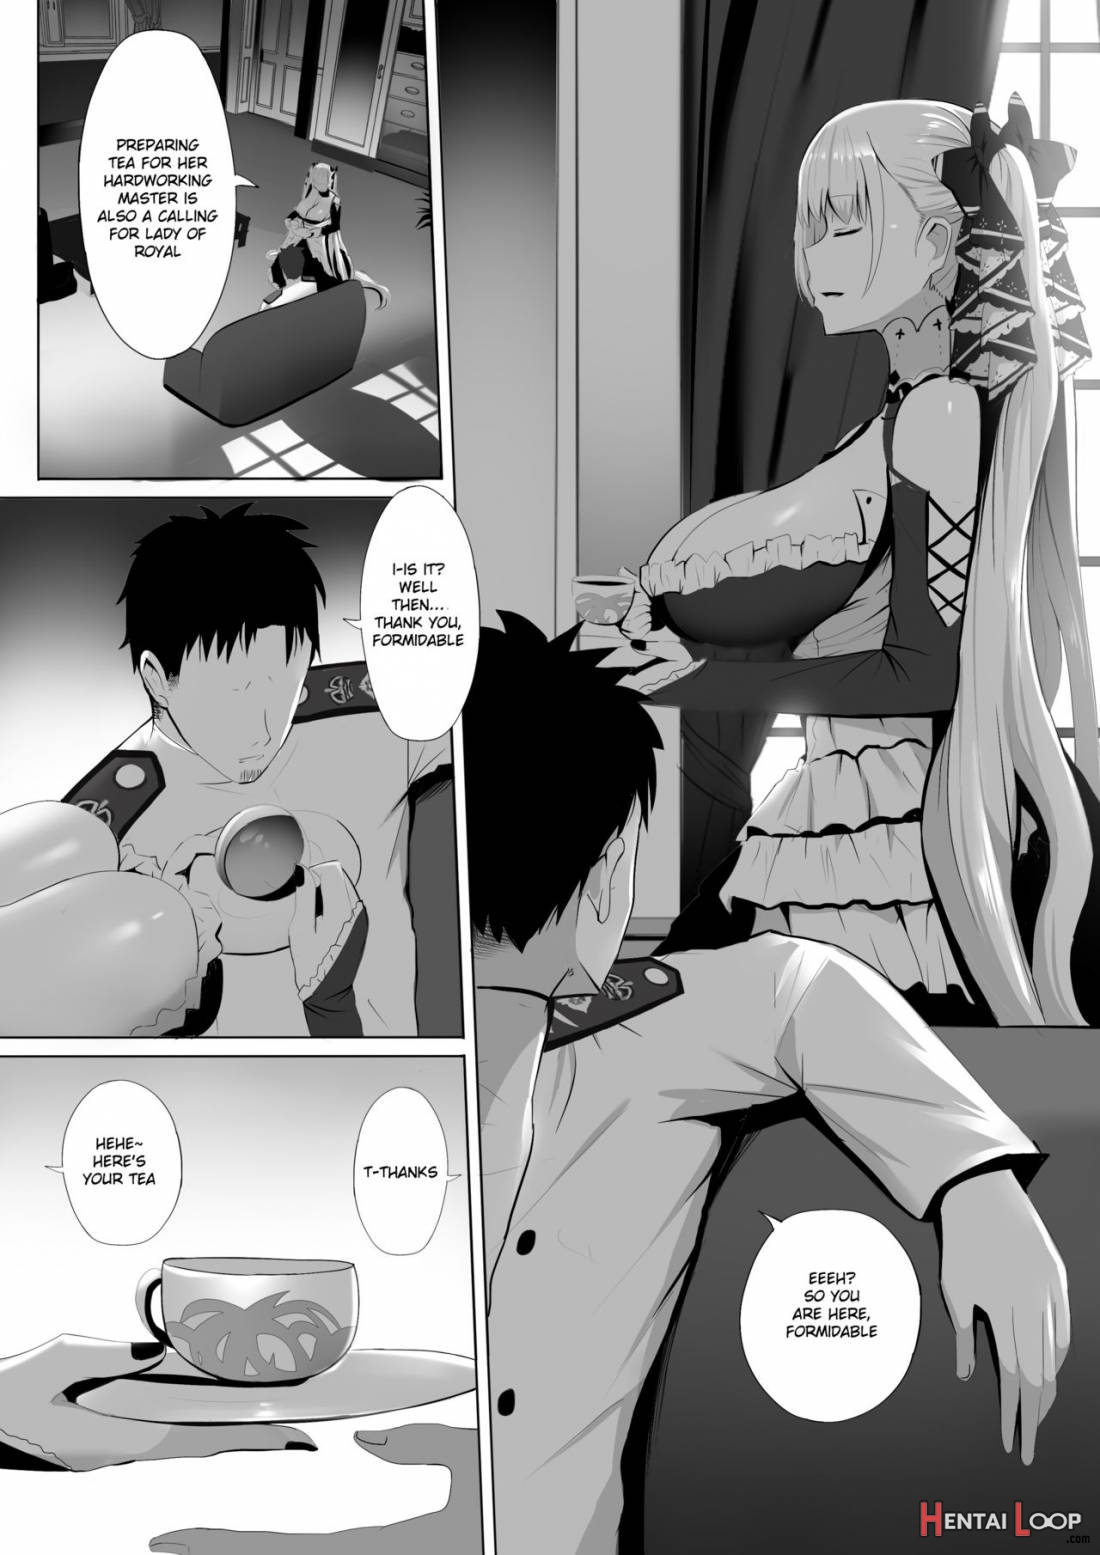 Formidable to Tea Time + SP page 3